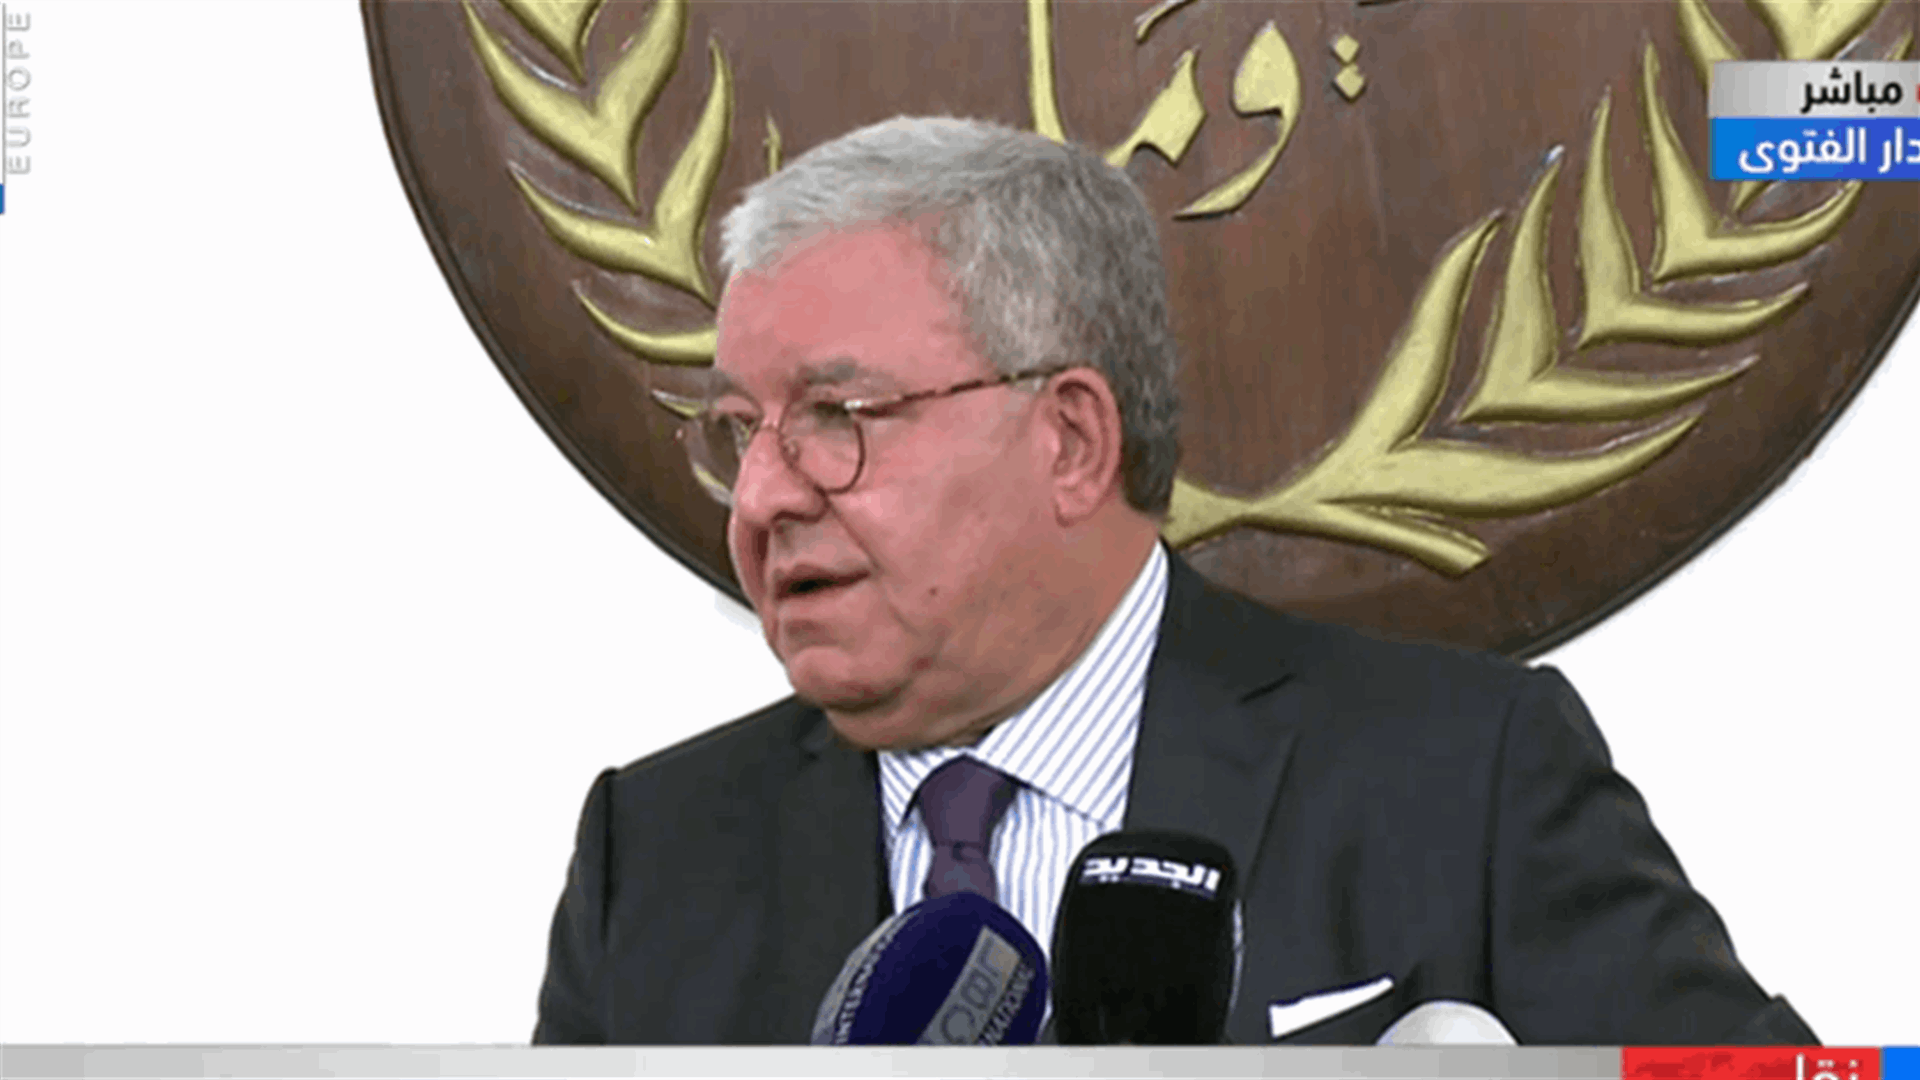 Al-Mashnouq: The issue became a matter of dignities, Lebanon needs a reconciliation government